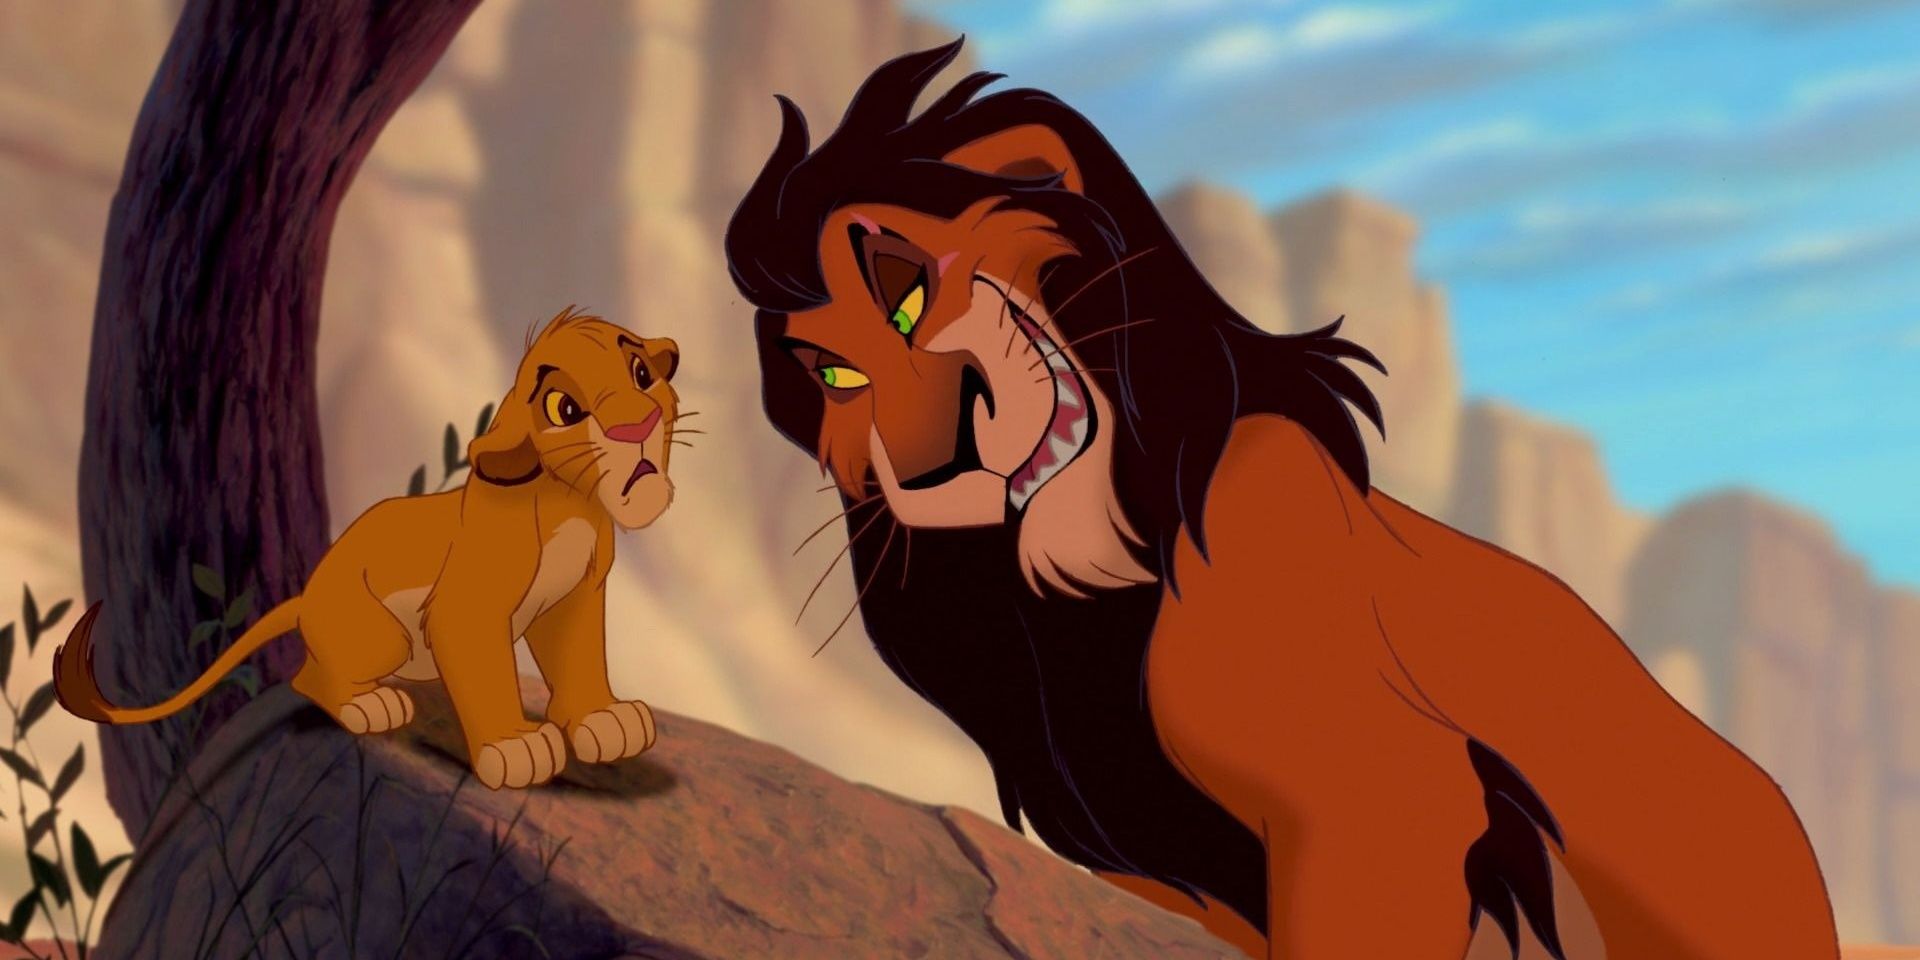 Scar intimidates Simba in The Lion King